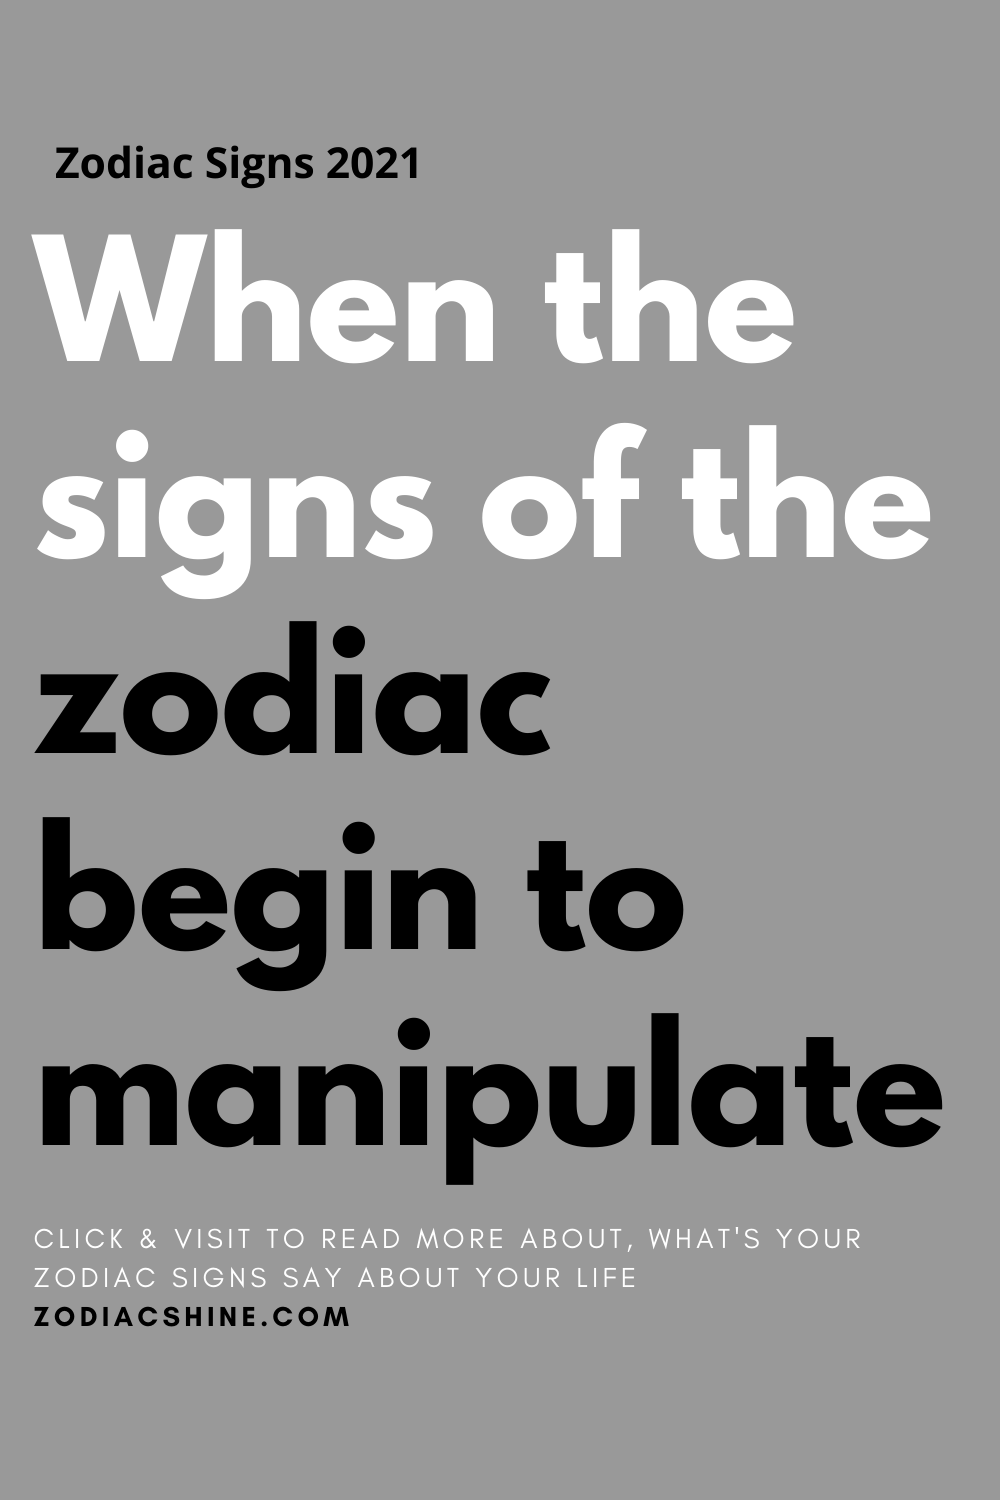 When the signs of the zodiac begin to manipulate